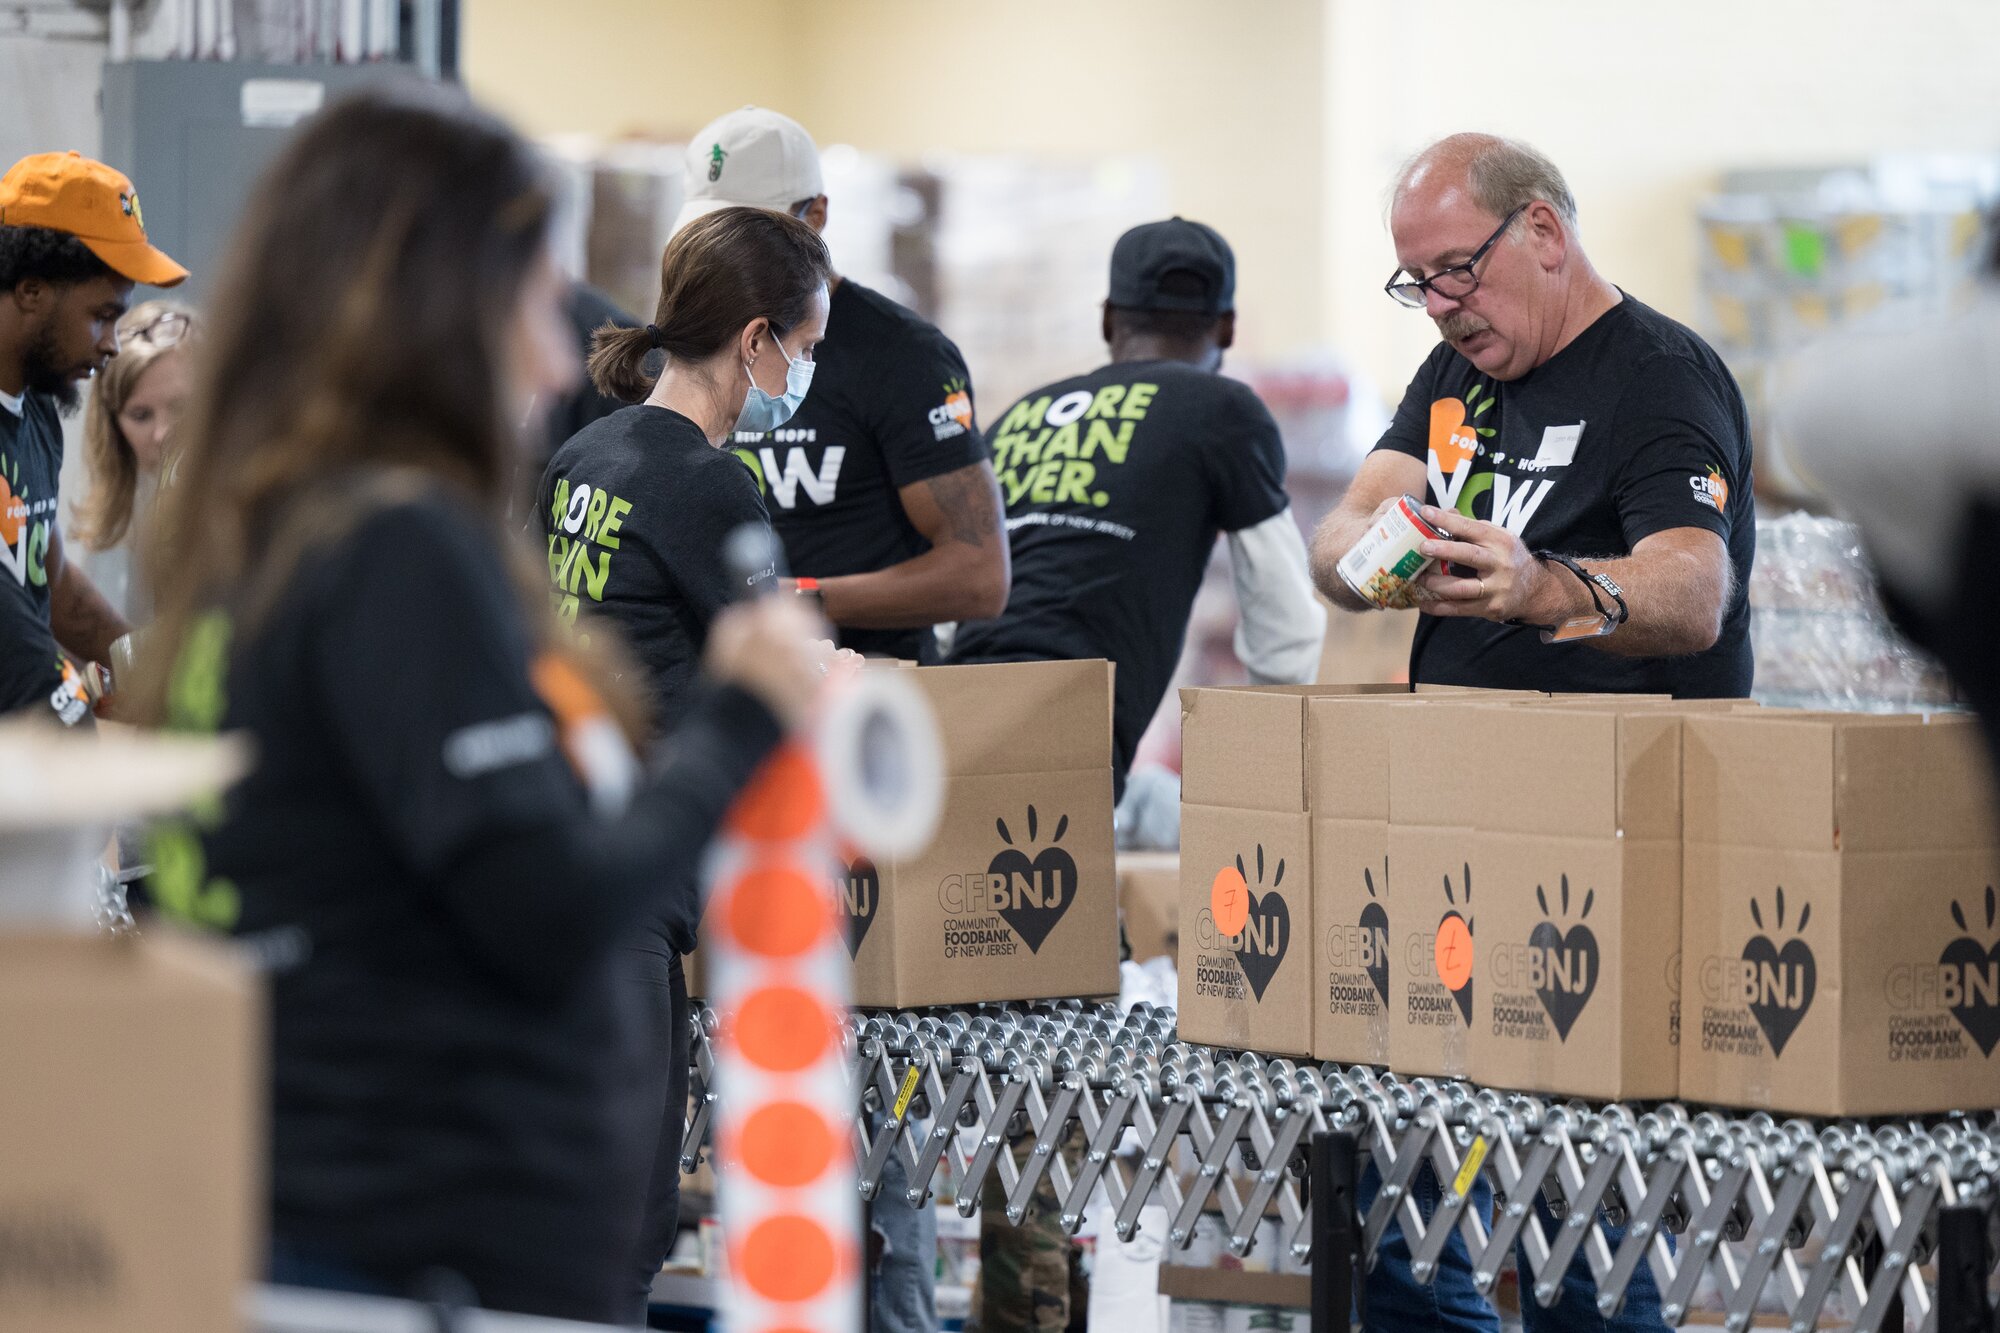 community foodbank of new jersey volunteers packing boxes